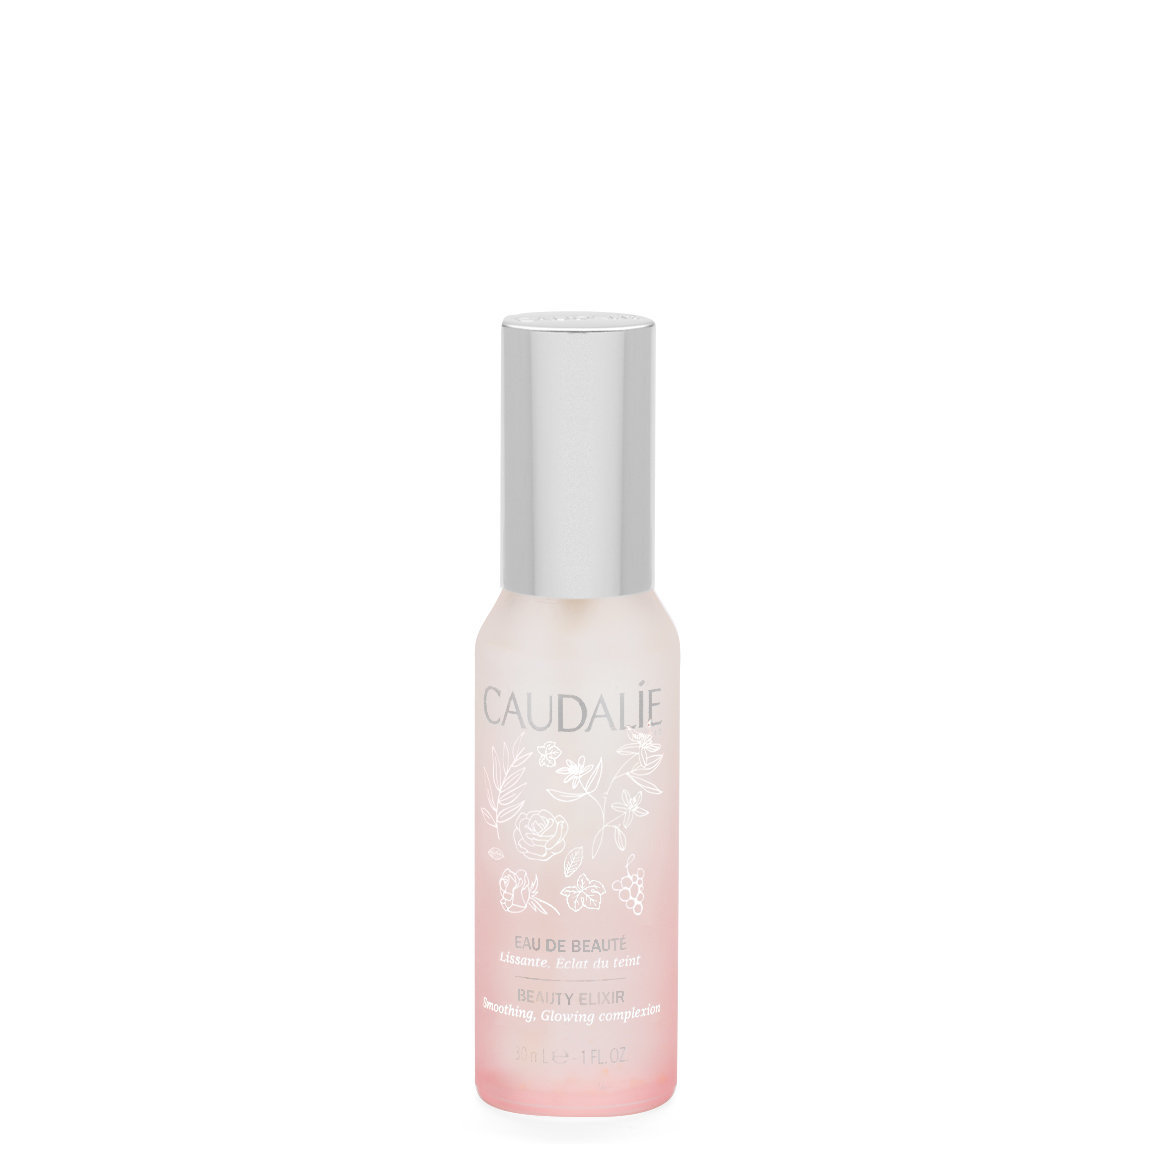 Caudalie Limited Edition Beauty Elixir 30 ml alternative view 1 - product swatch.